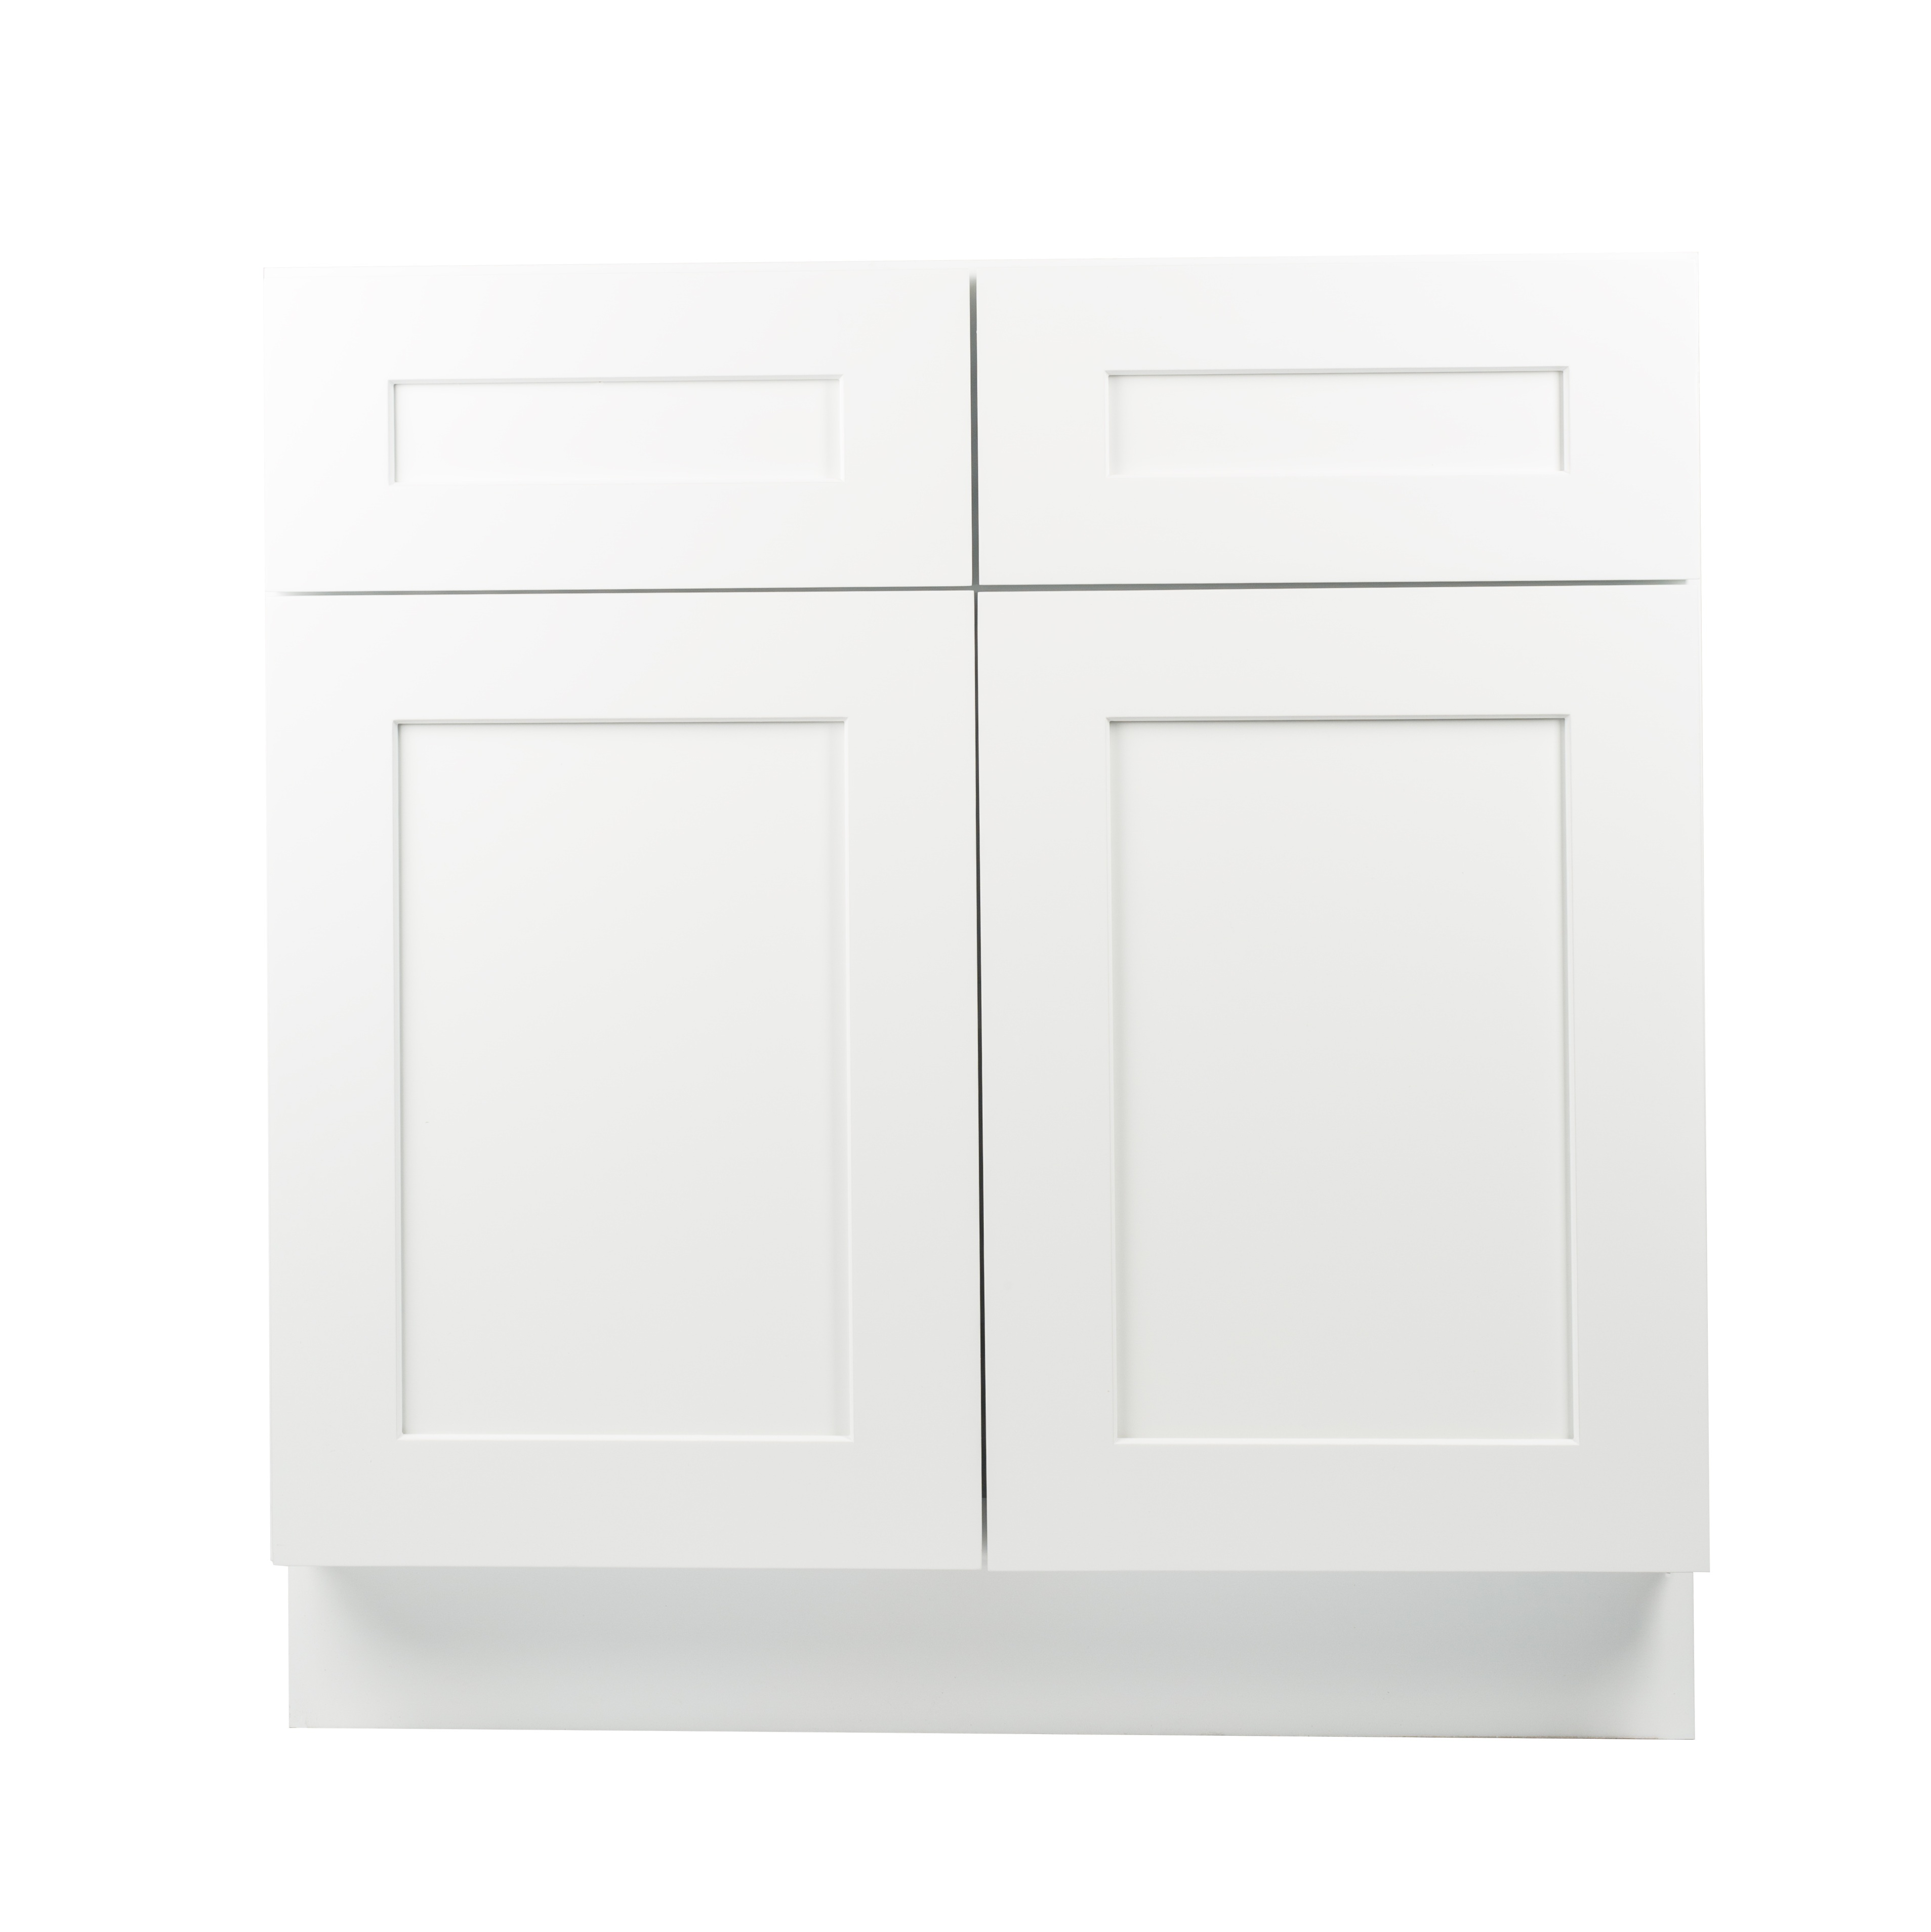 Ready to Assemble 36Wx34.5Hx24D in. Shaker Base Cabinet with 2 Door and 2 Drawer in White